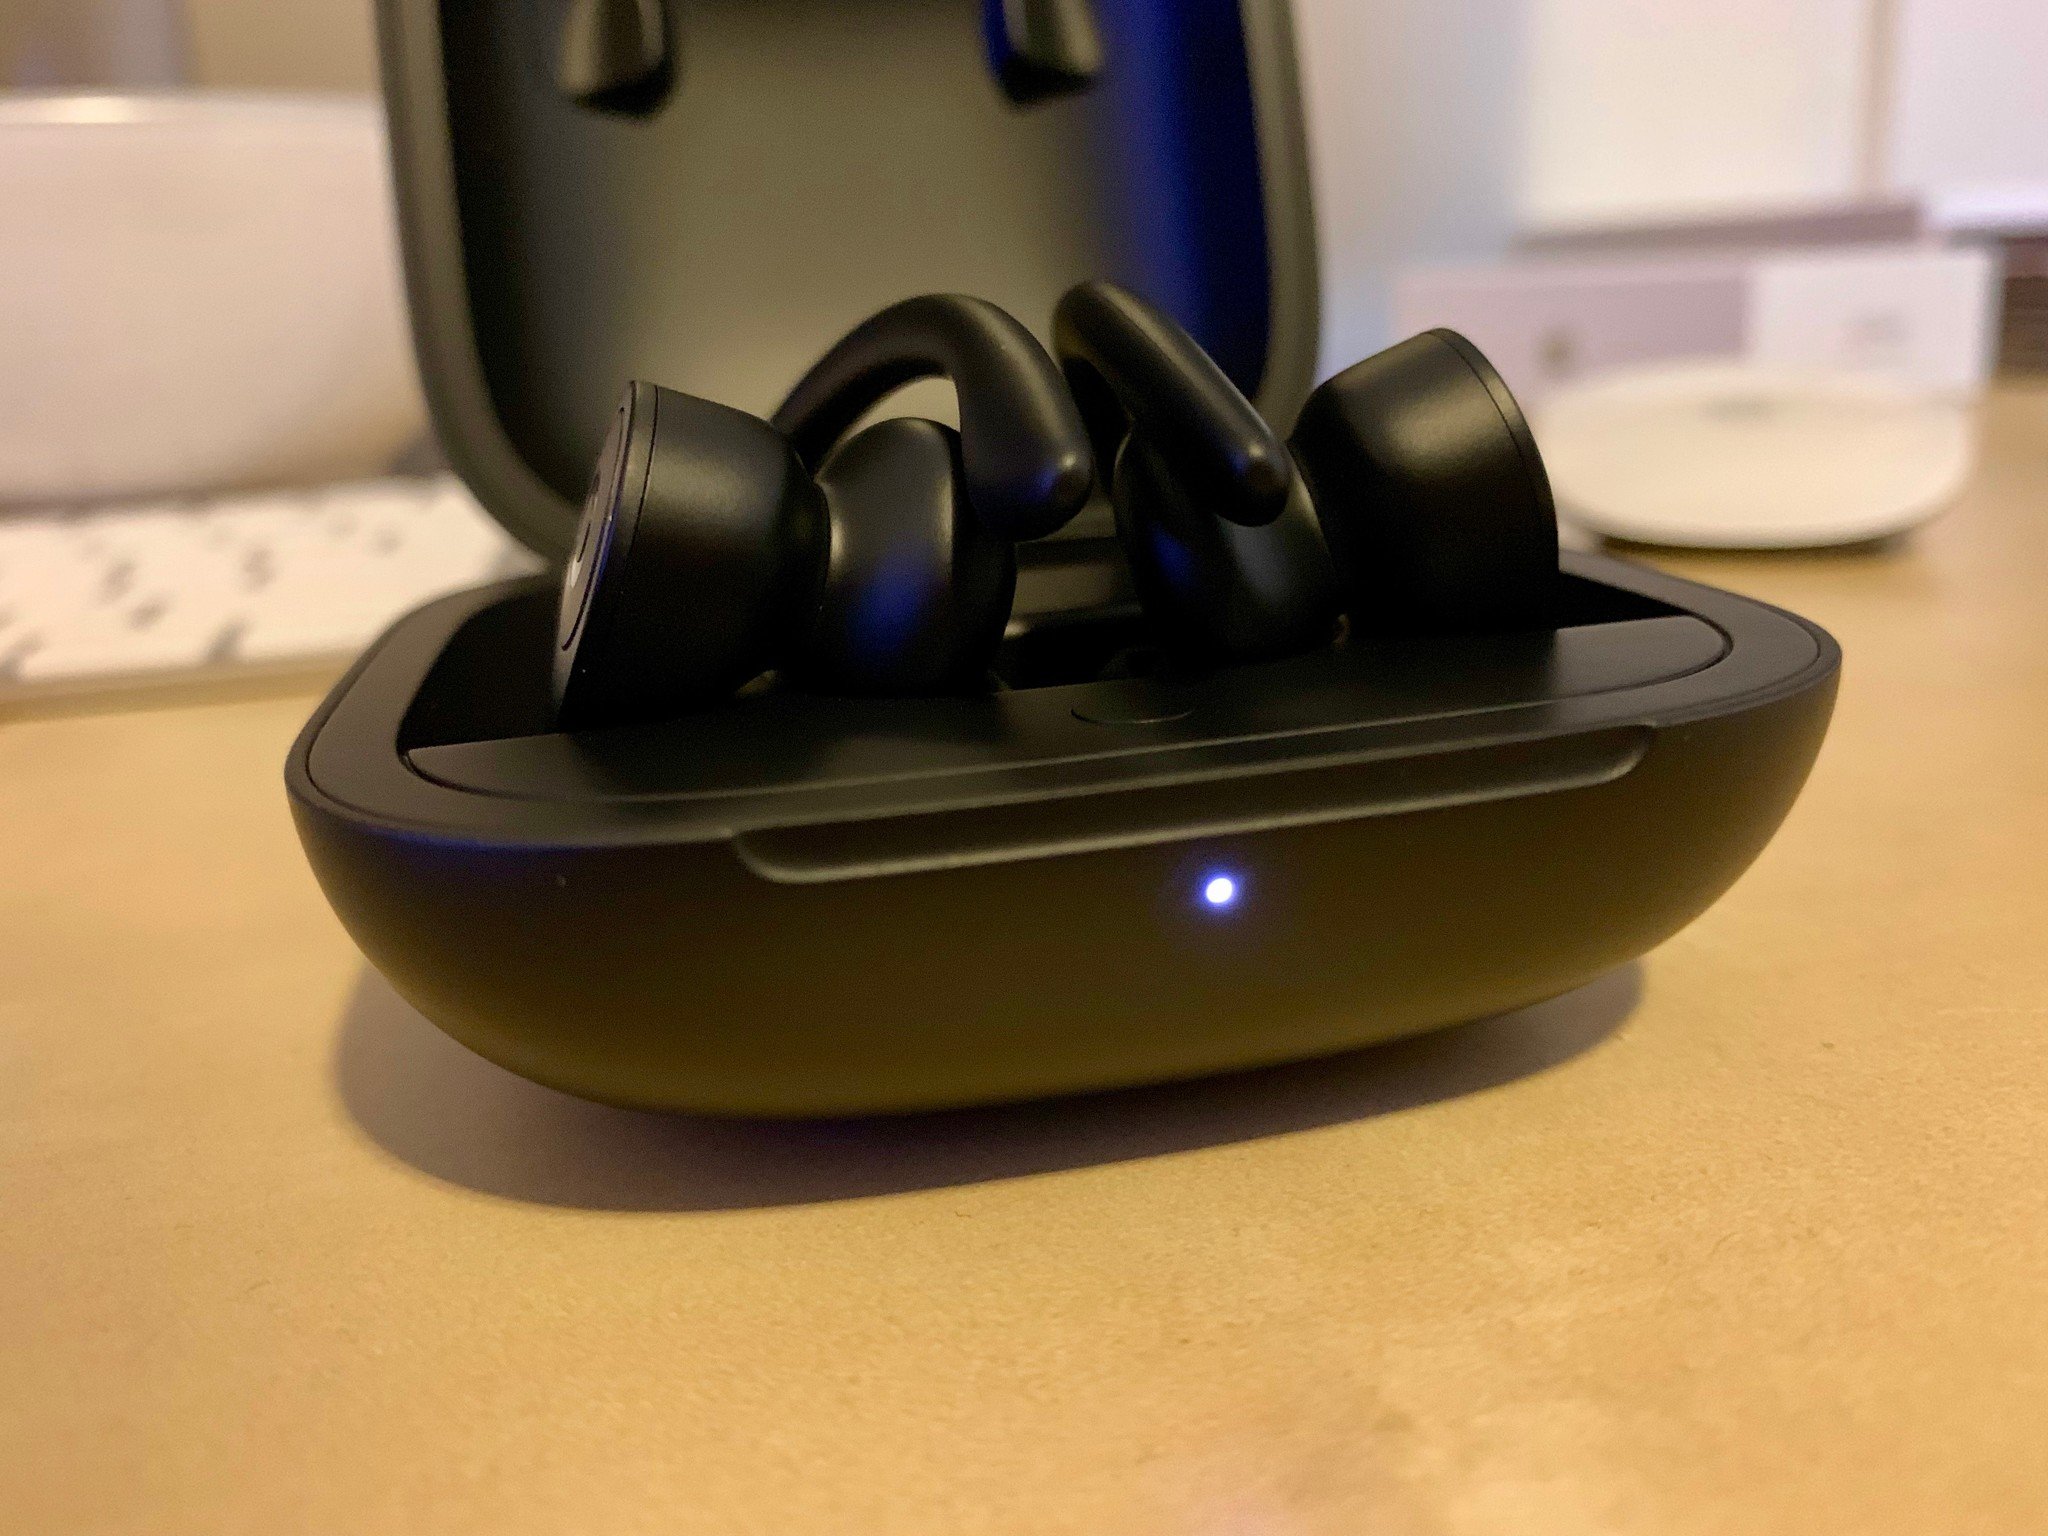 Powerbeats Pro with the glowing pairing light